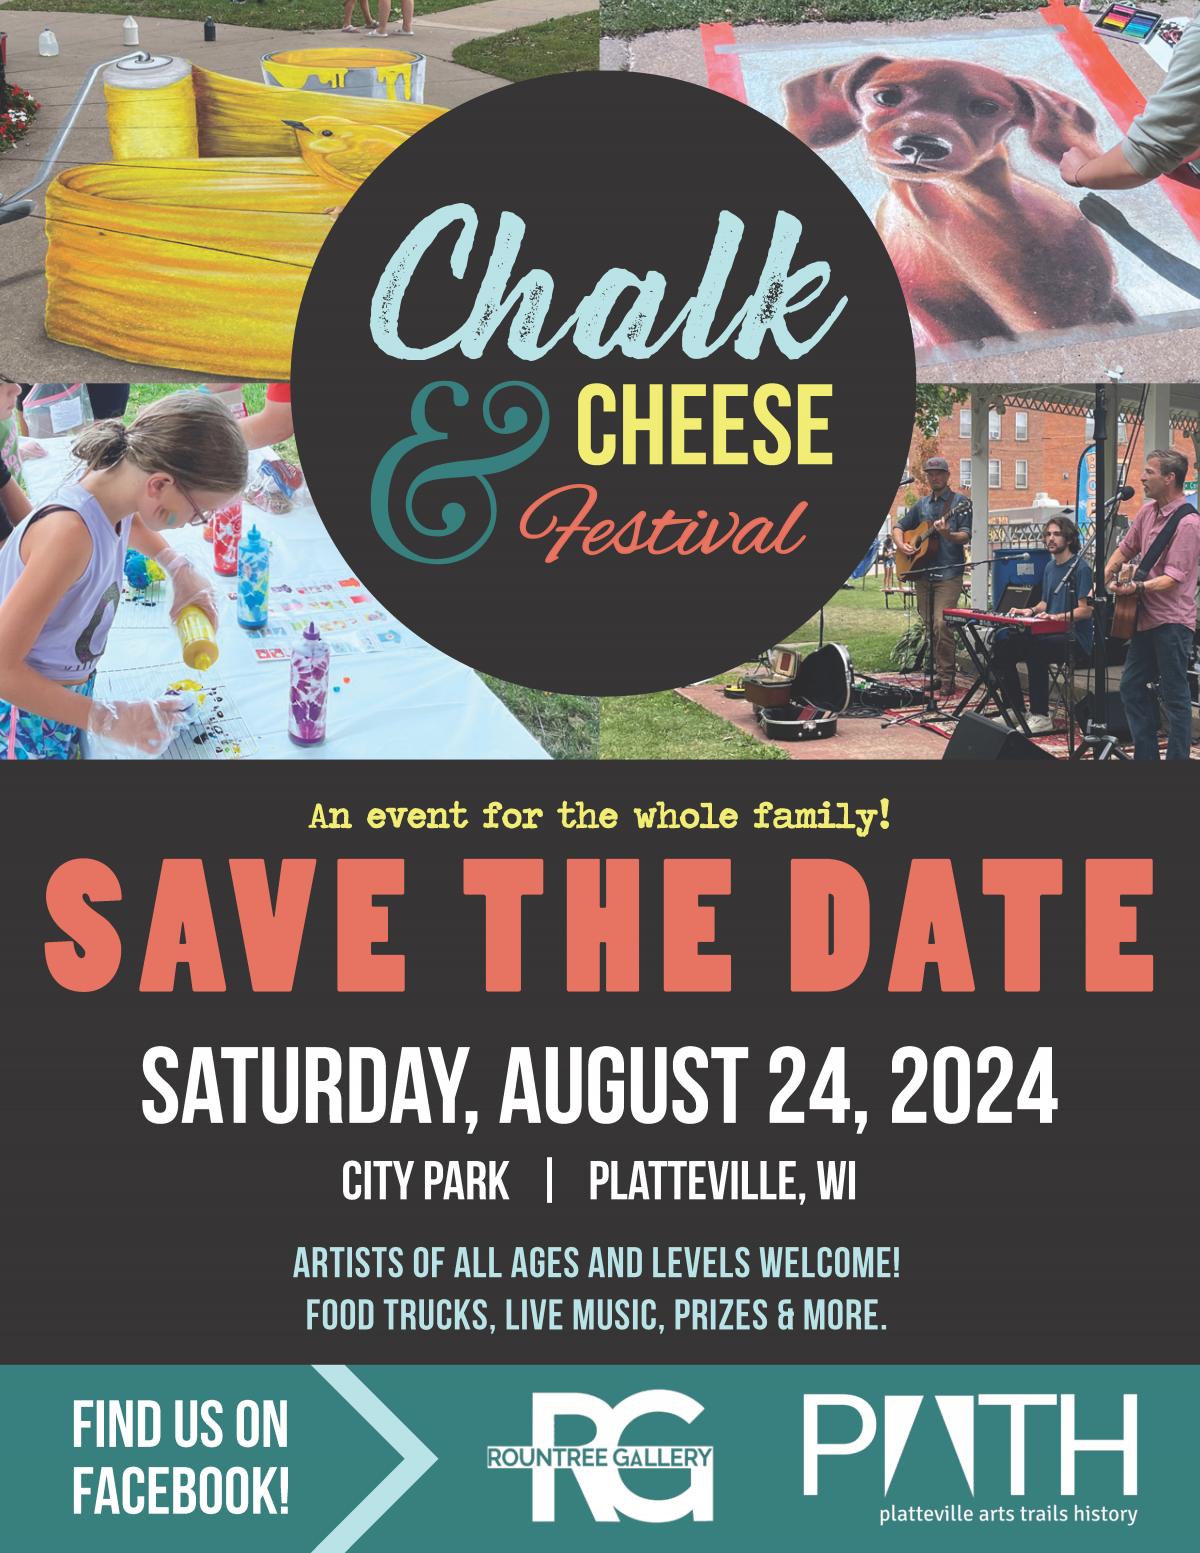 Save the Date for Chalk & Cheese Fest  - August 24, 2024